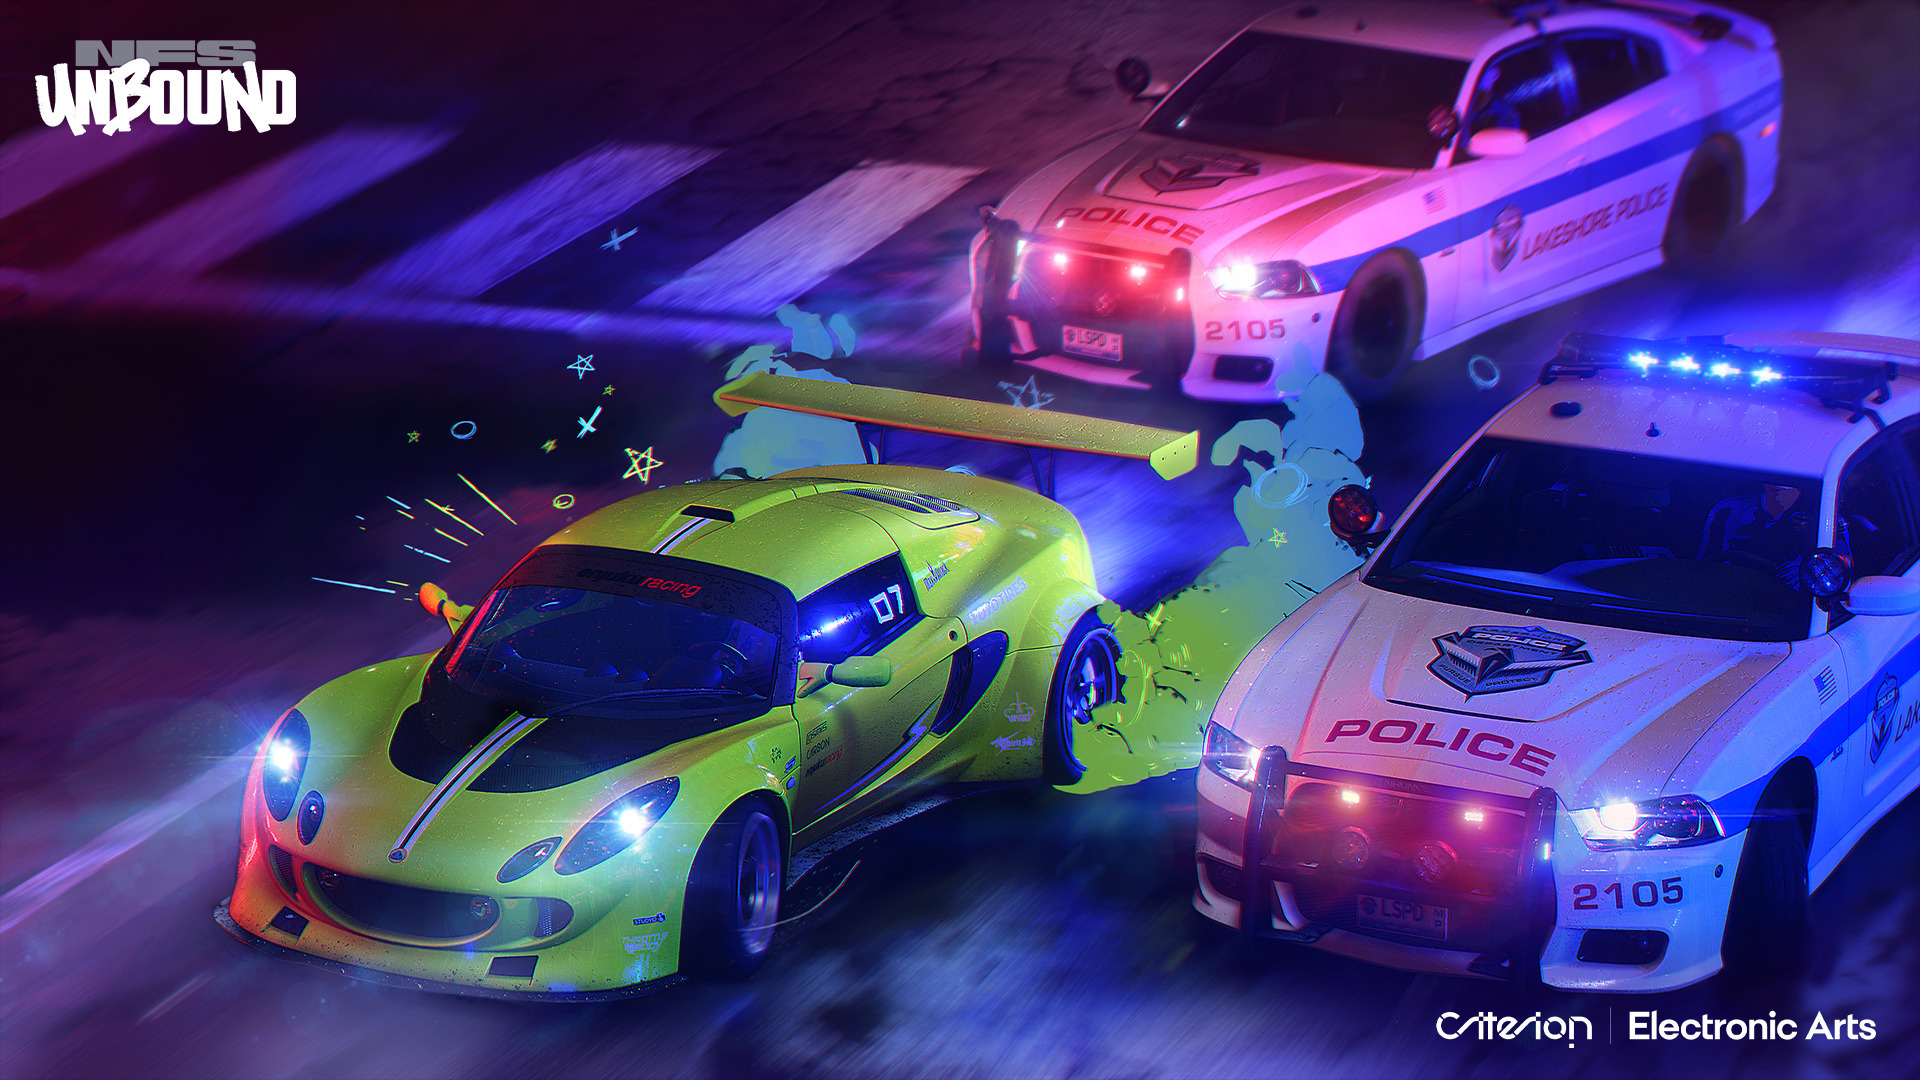 Gambling and police chases shown off in Need for Speed Unbound